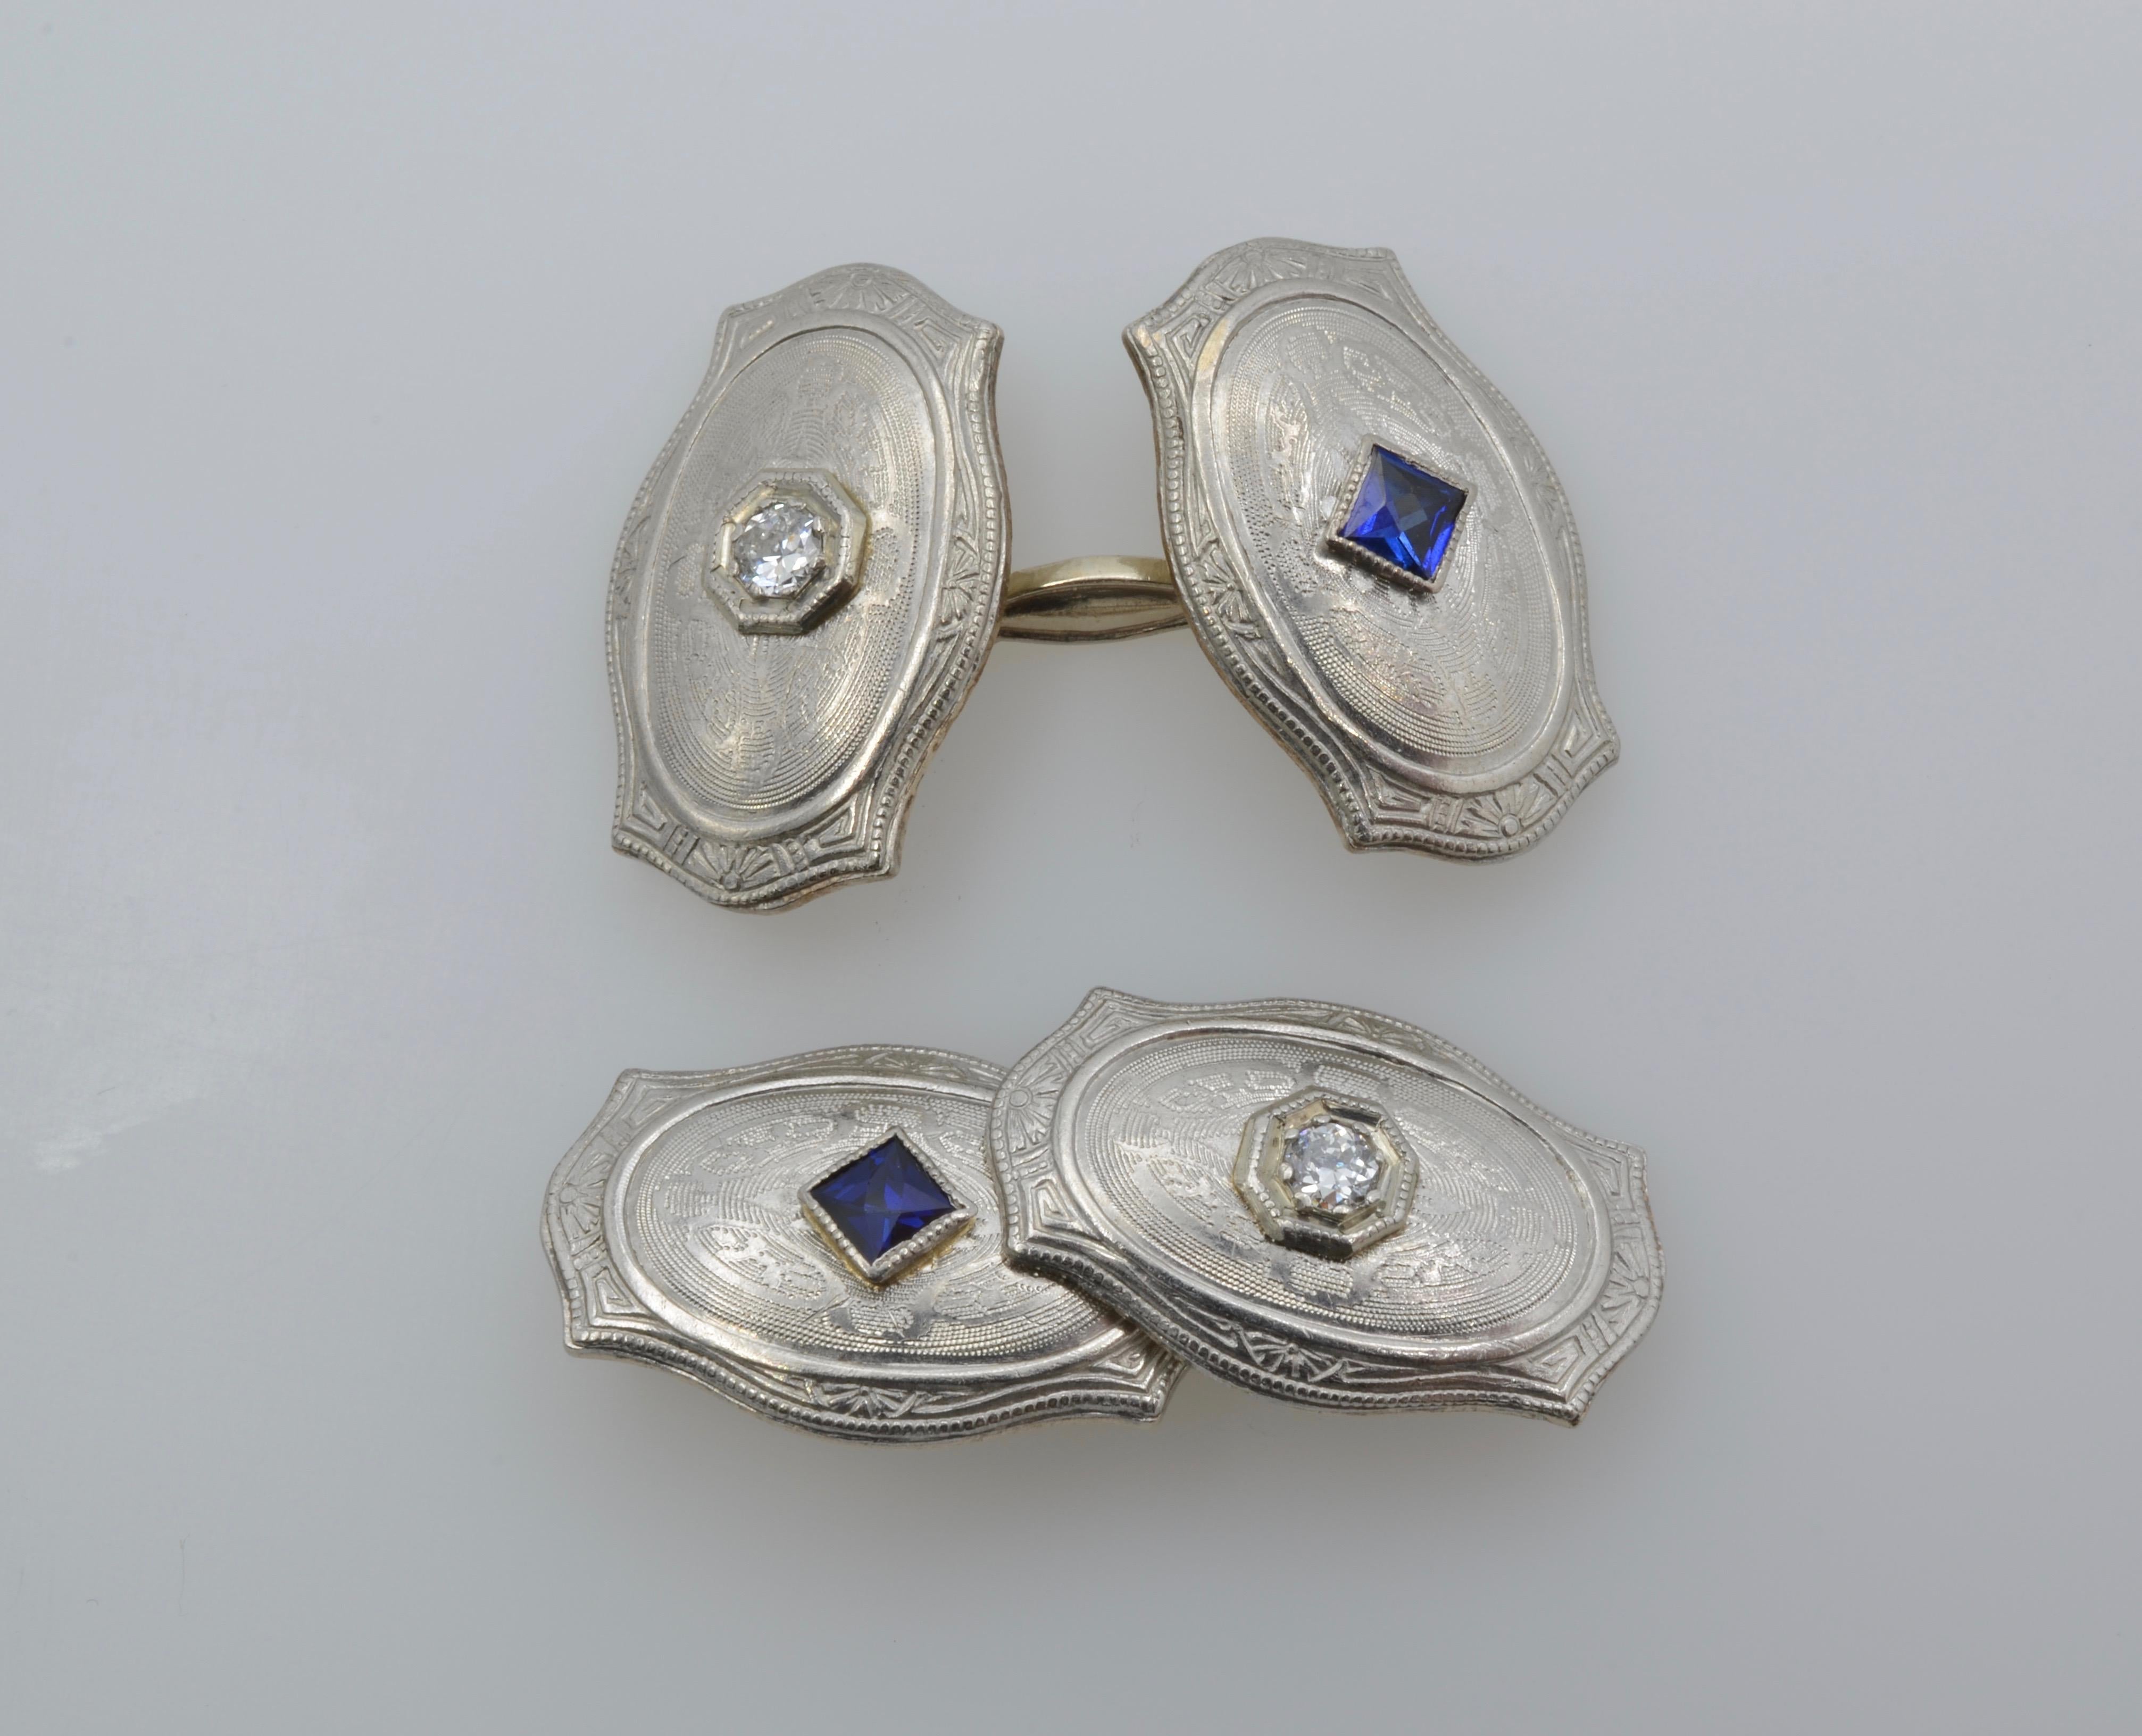 These 1920's French cuff-links are laminate made by rolling two sheets of metal together imprinting the beautiful intricate design. Made of 14K white gold and platinum these antique cuff-links have substantial weight and are a piece of history. The